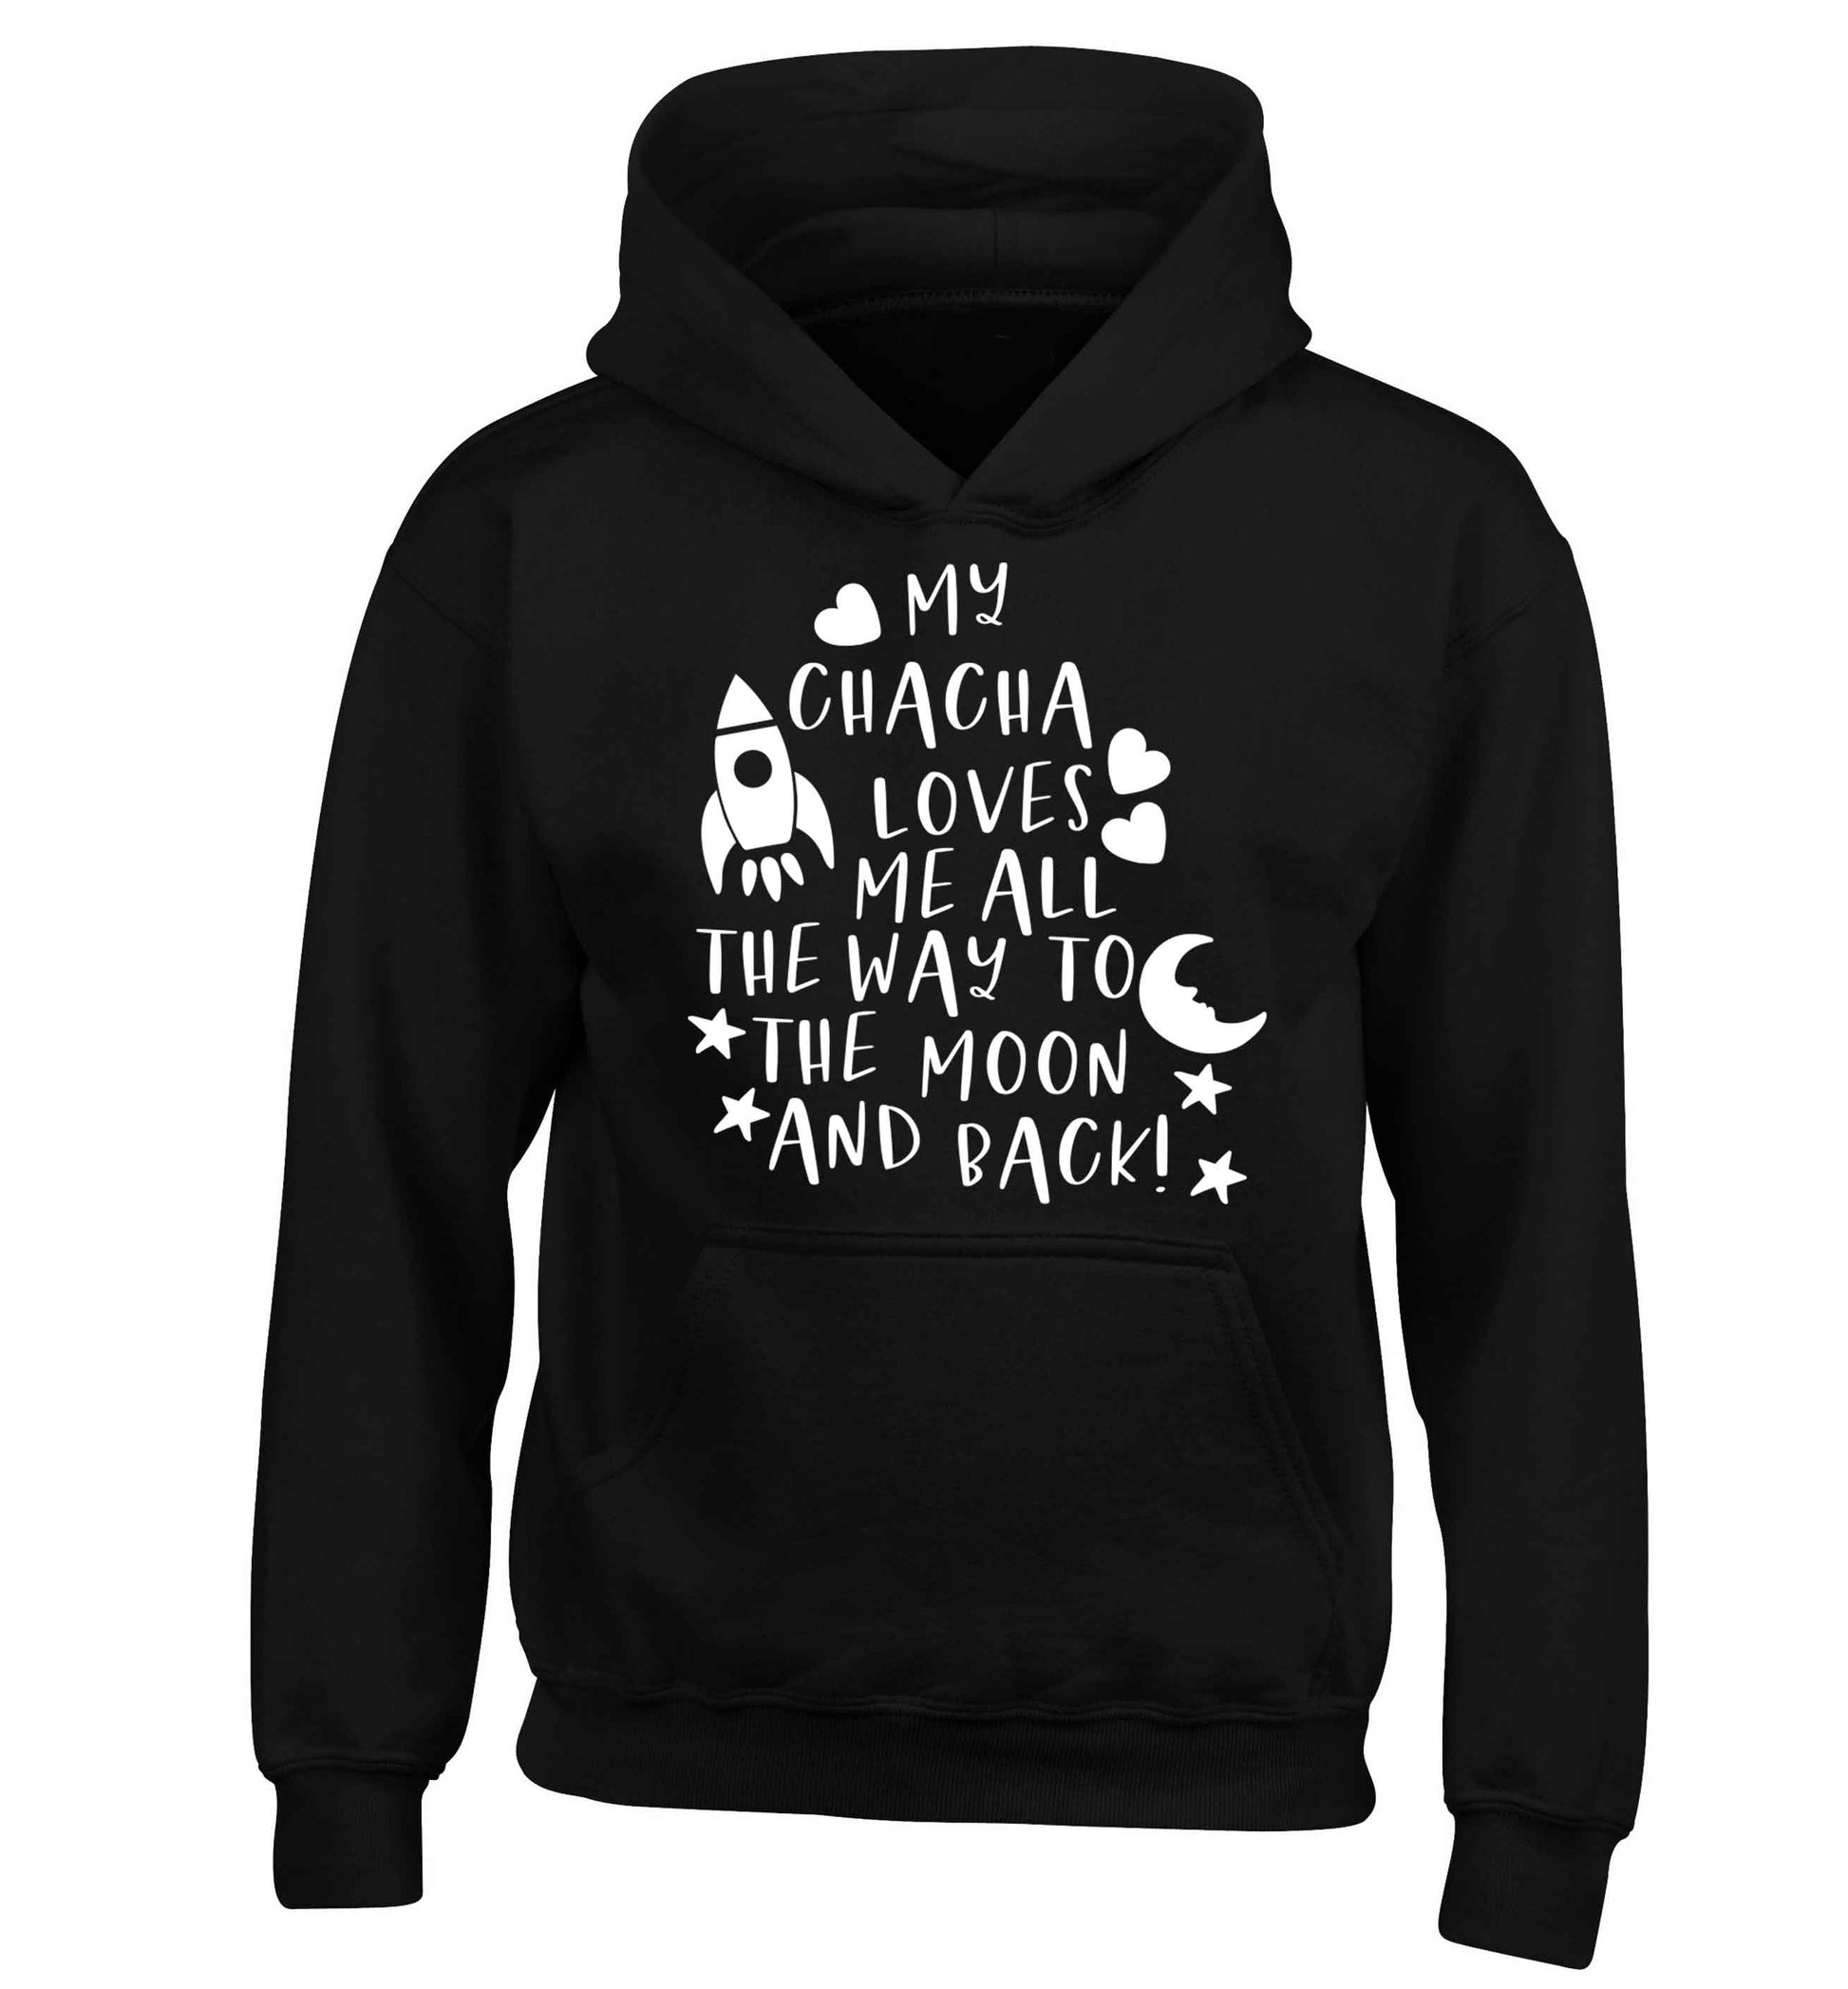 My chacha loves me all the way to the moon and back children's black hoodie 12-13 Years